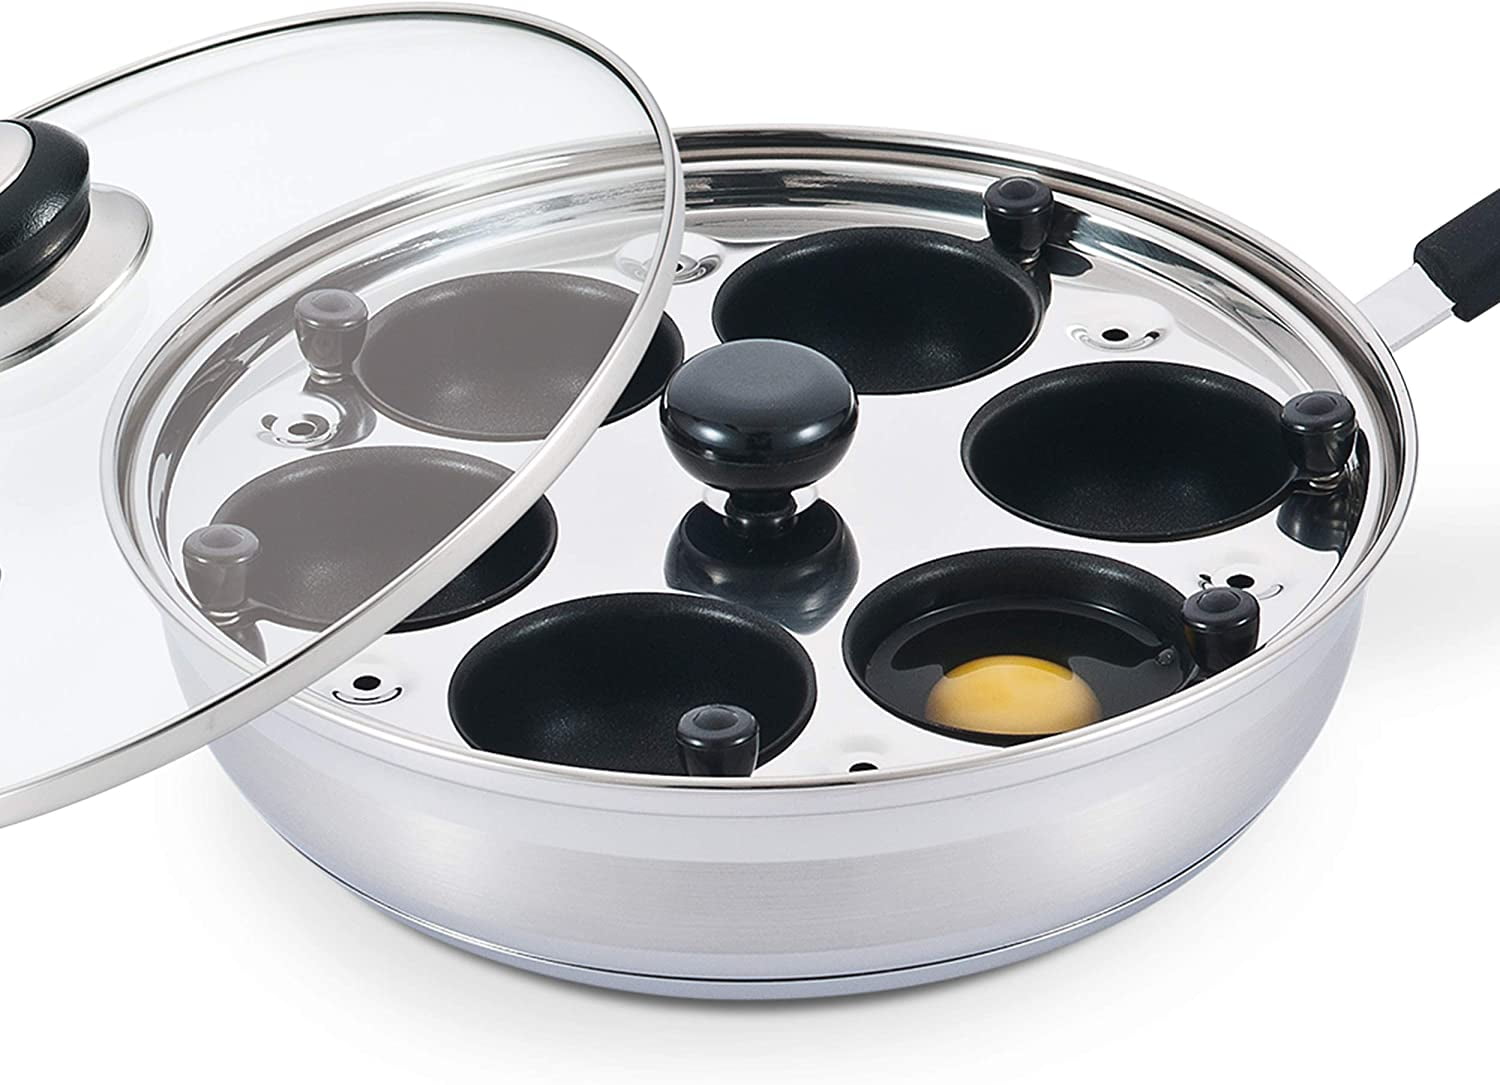 judge 2hole egg poacher in stainless steel for use on any hob inc induction 